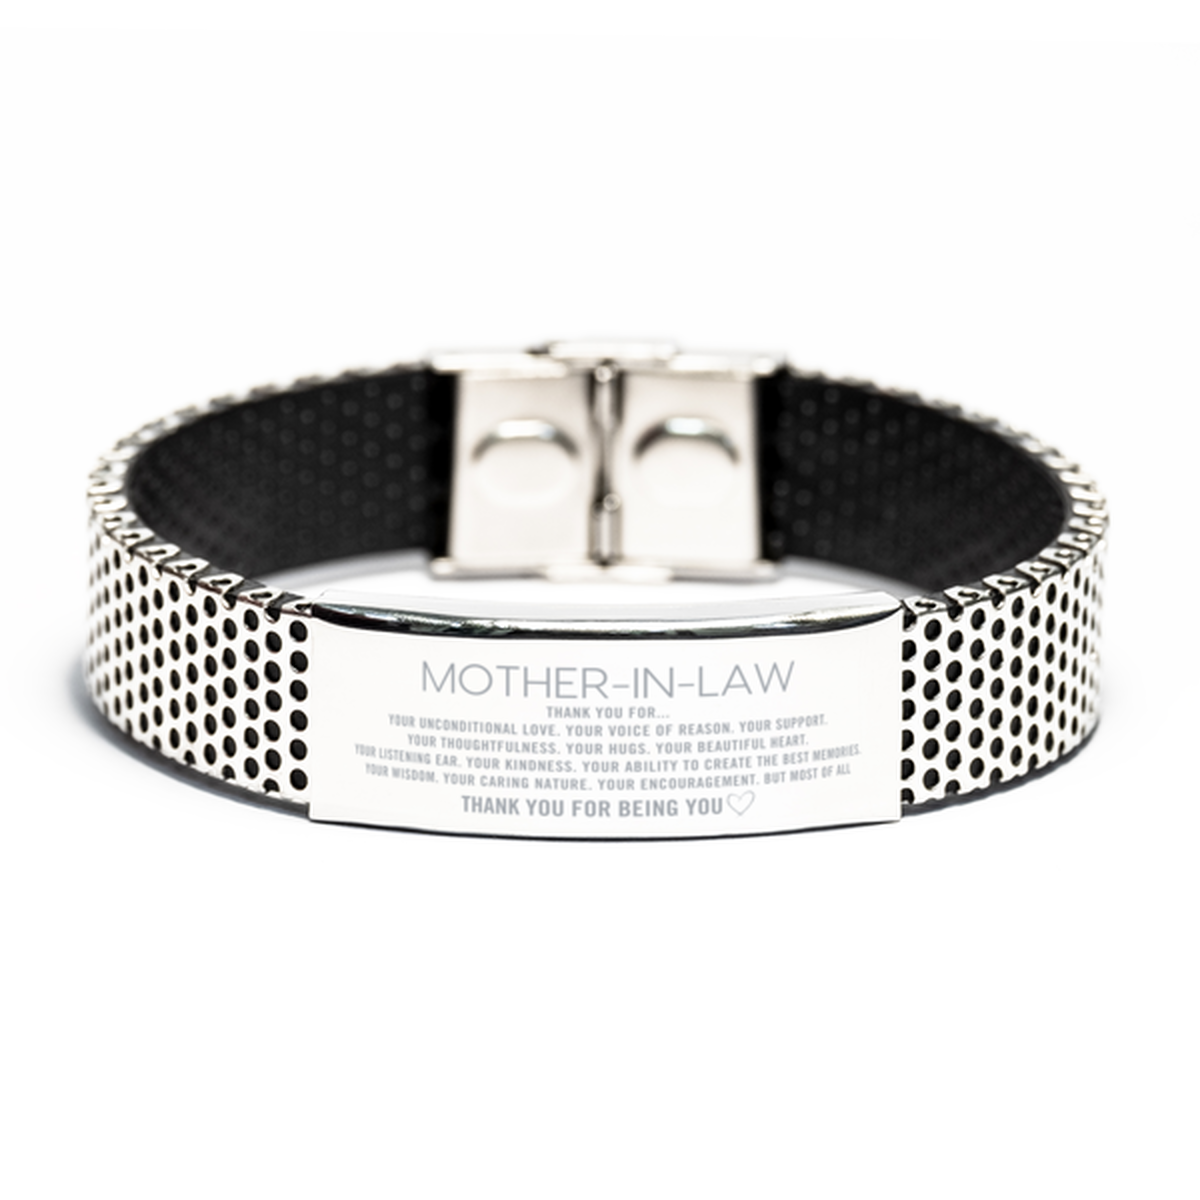 Mother-In-Law Stainless Steel Bracelet Custom, Engraved Gifts For Mother-In-Law Christmas Graduation Birthday Gifts for Men Women Mother-In-Law Thank you for Your unconditional love